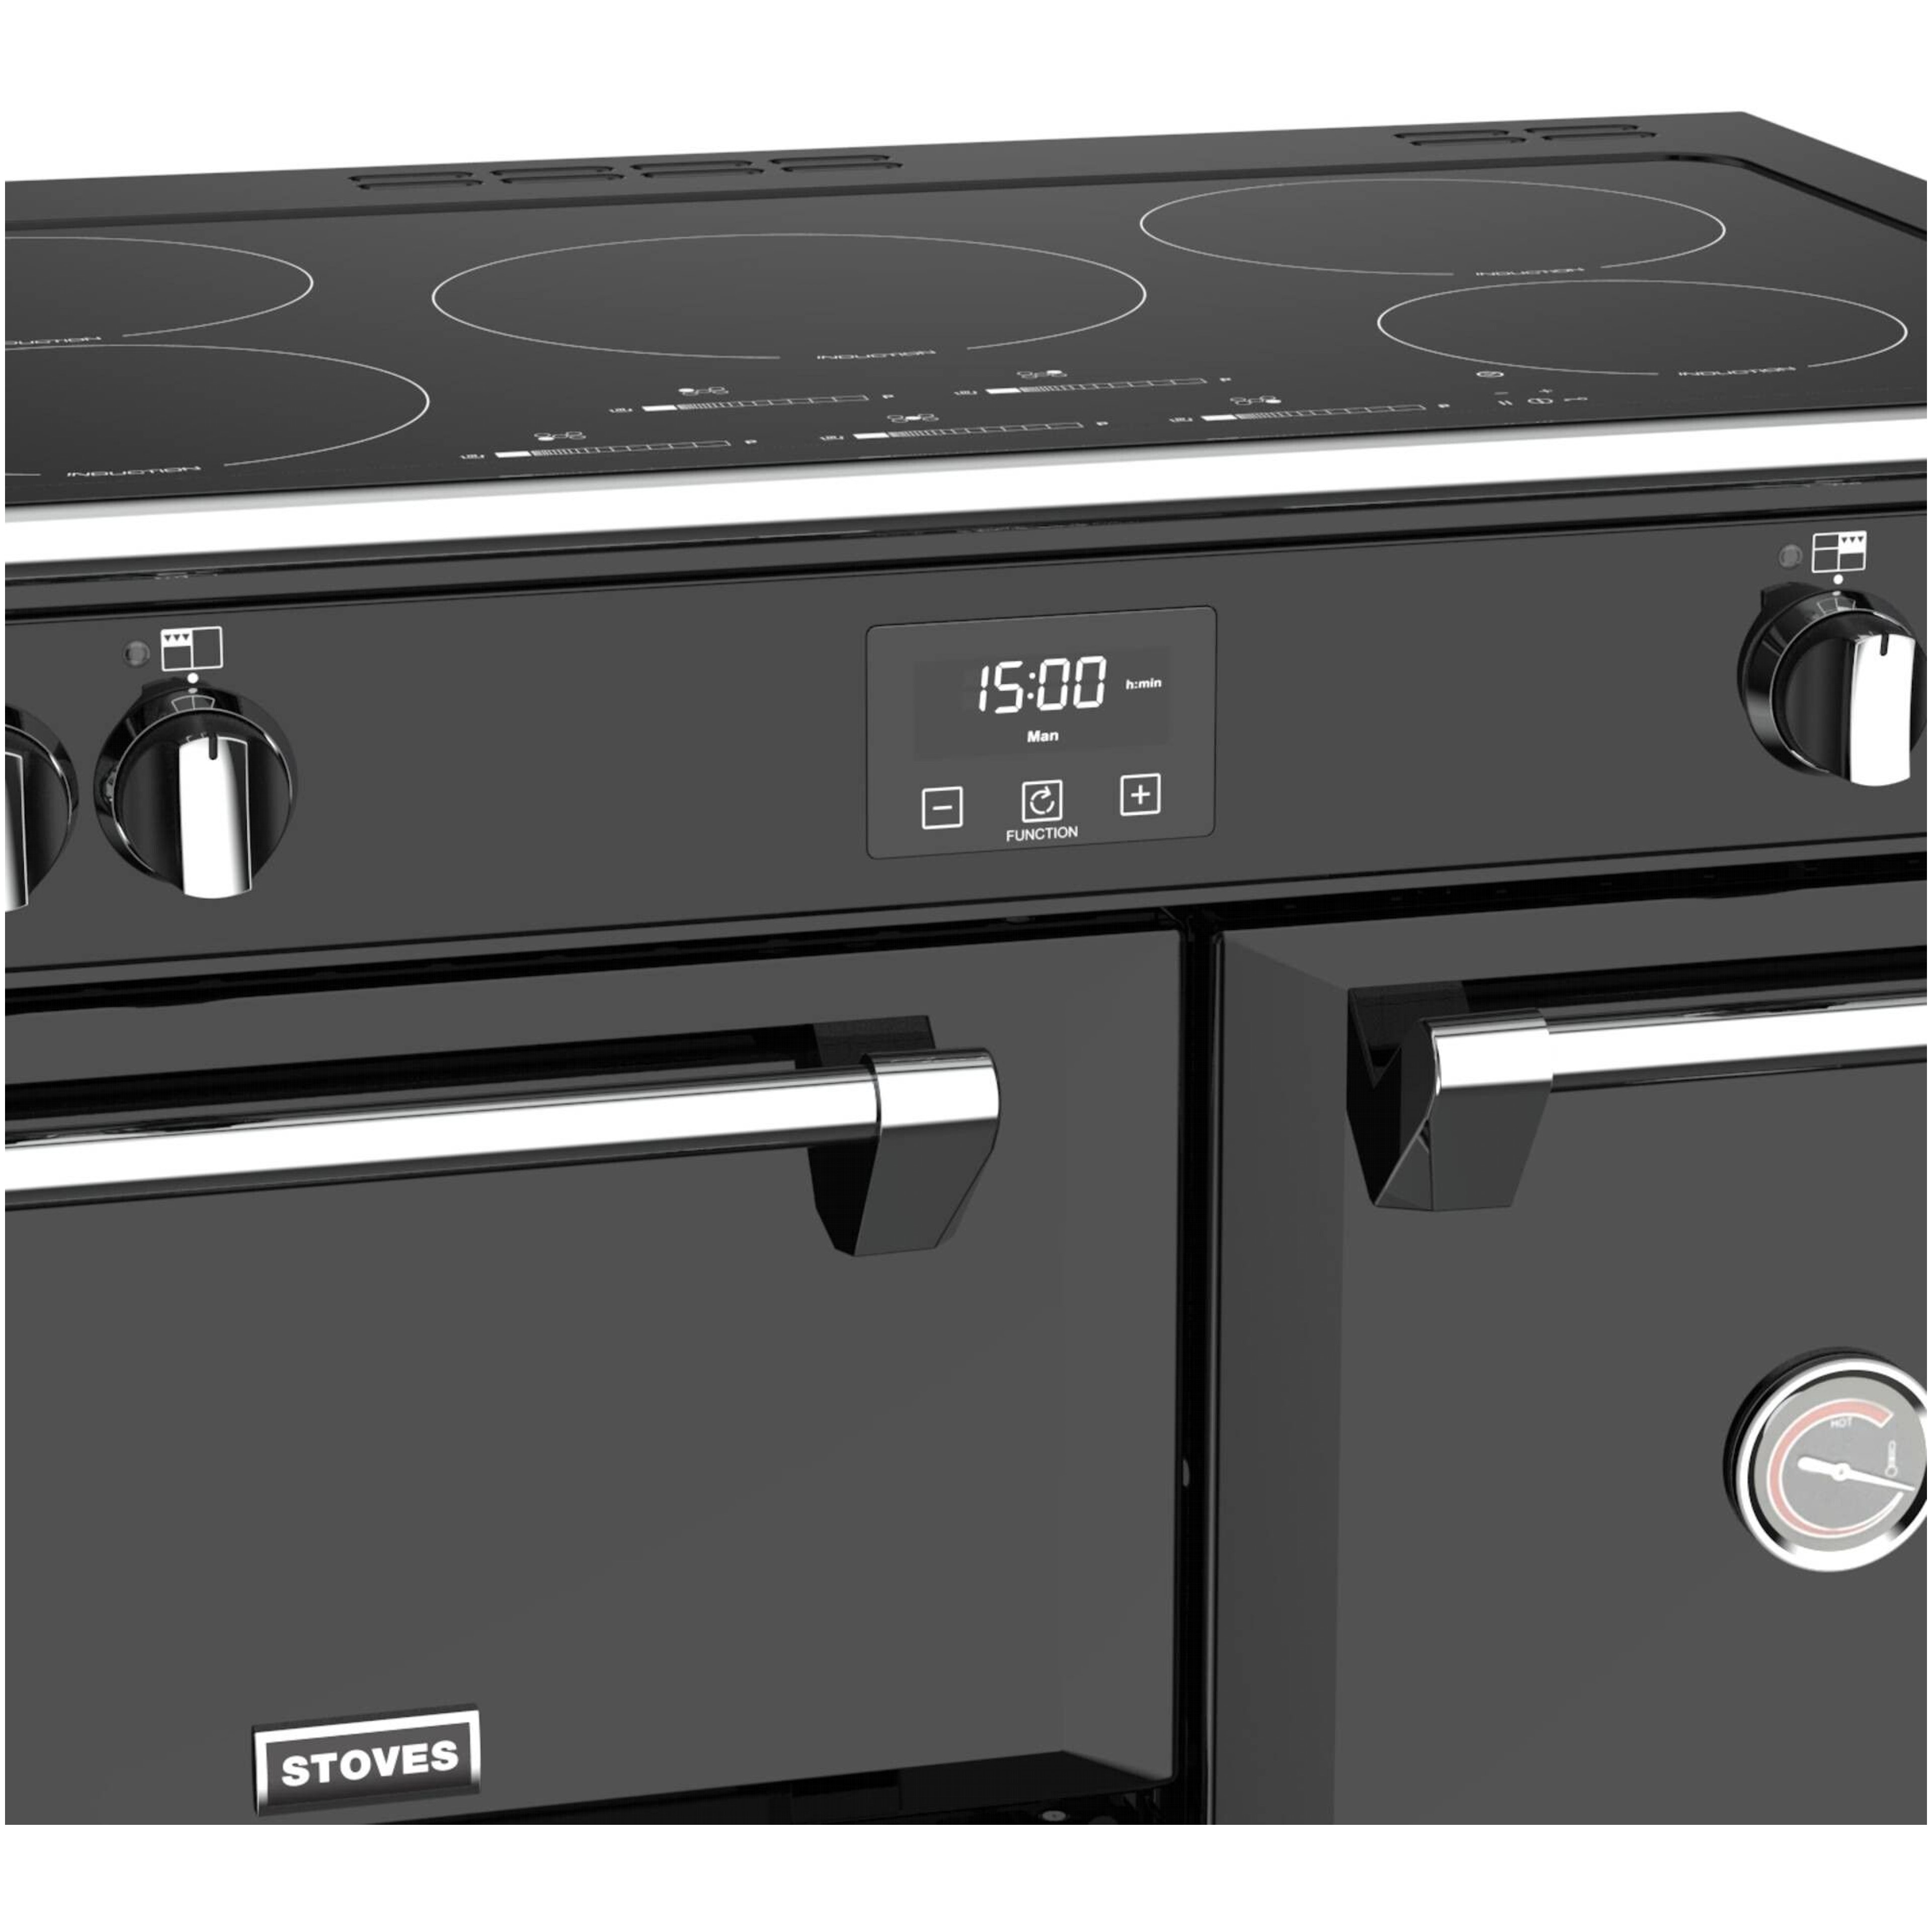 Stoves fornuis ST444445 afbeelding 3